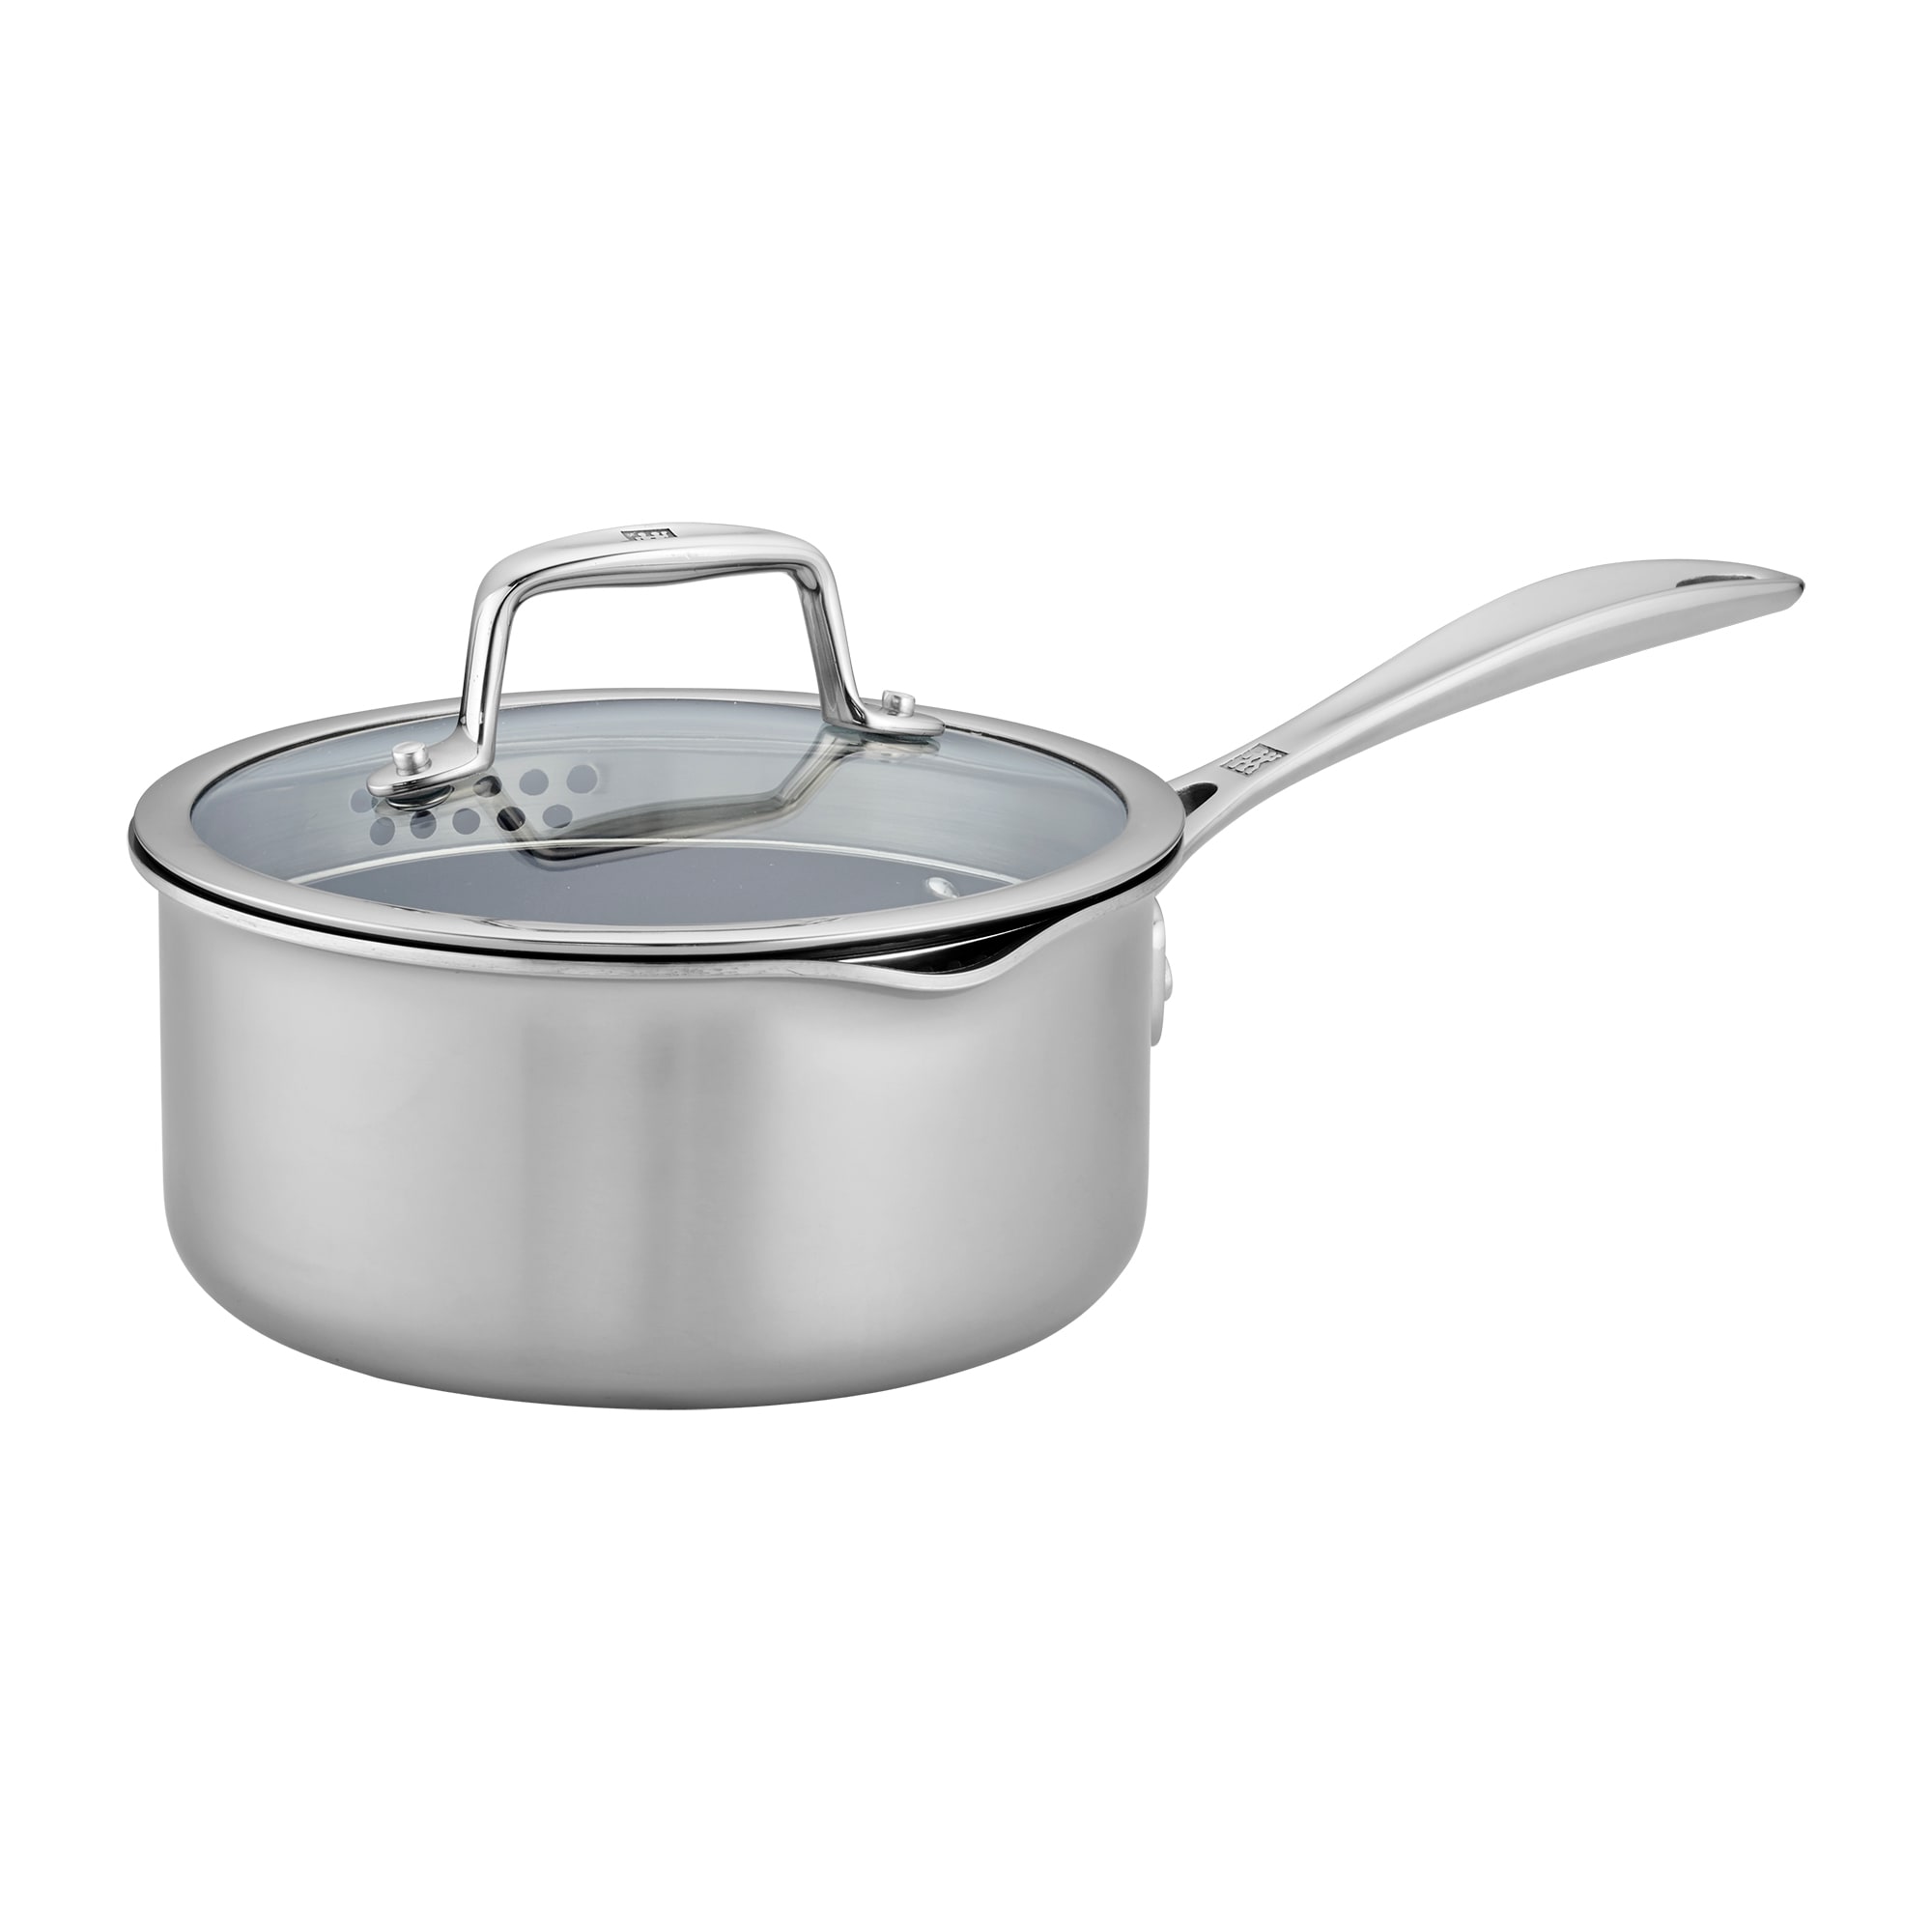 ZWILLING Clad Xtreme 10-Piece Polished Stainless Steel Cookware